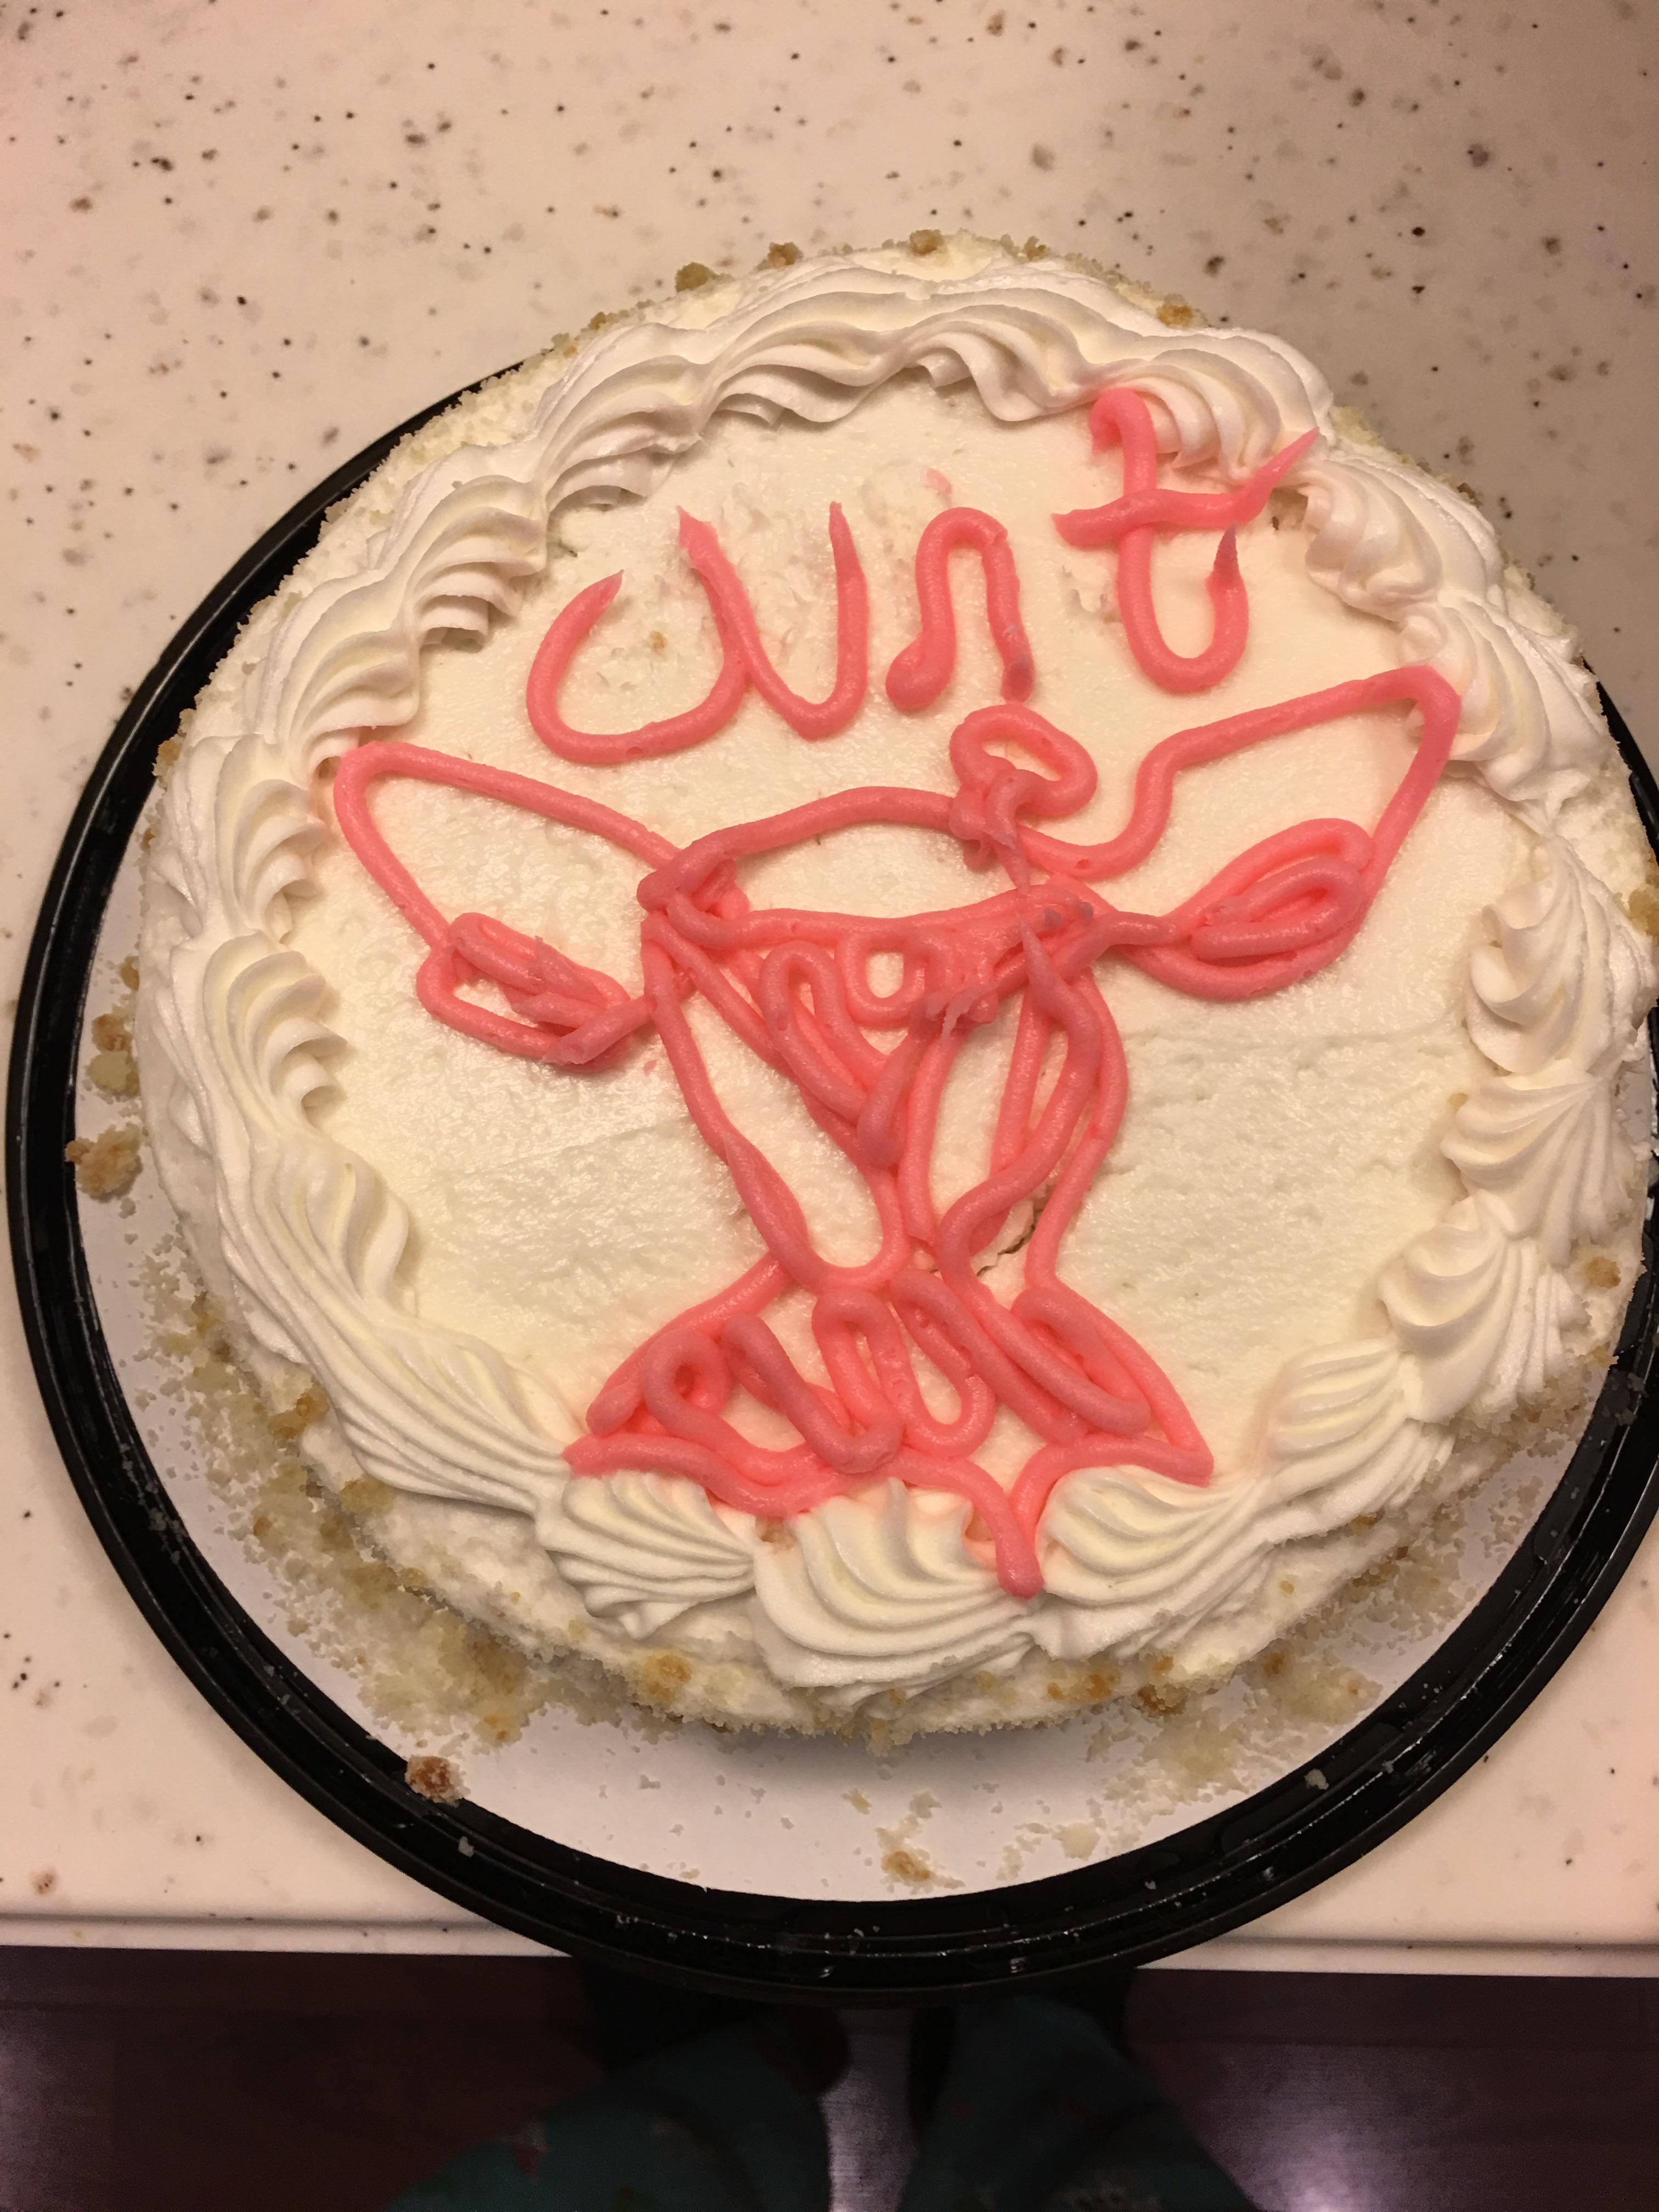 Best of What is a cuntcake